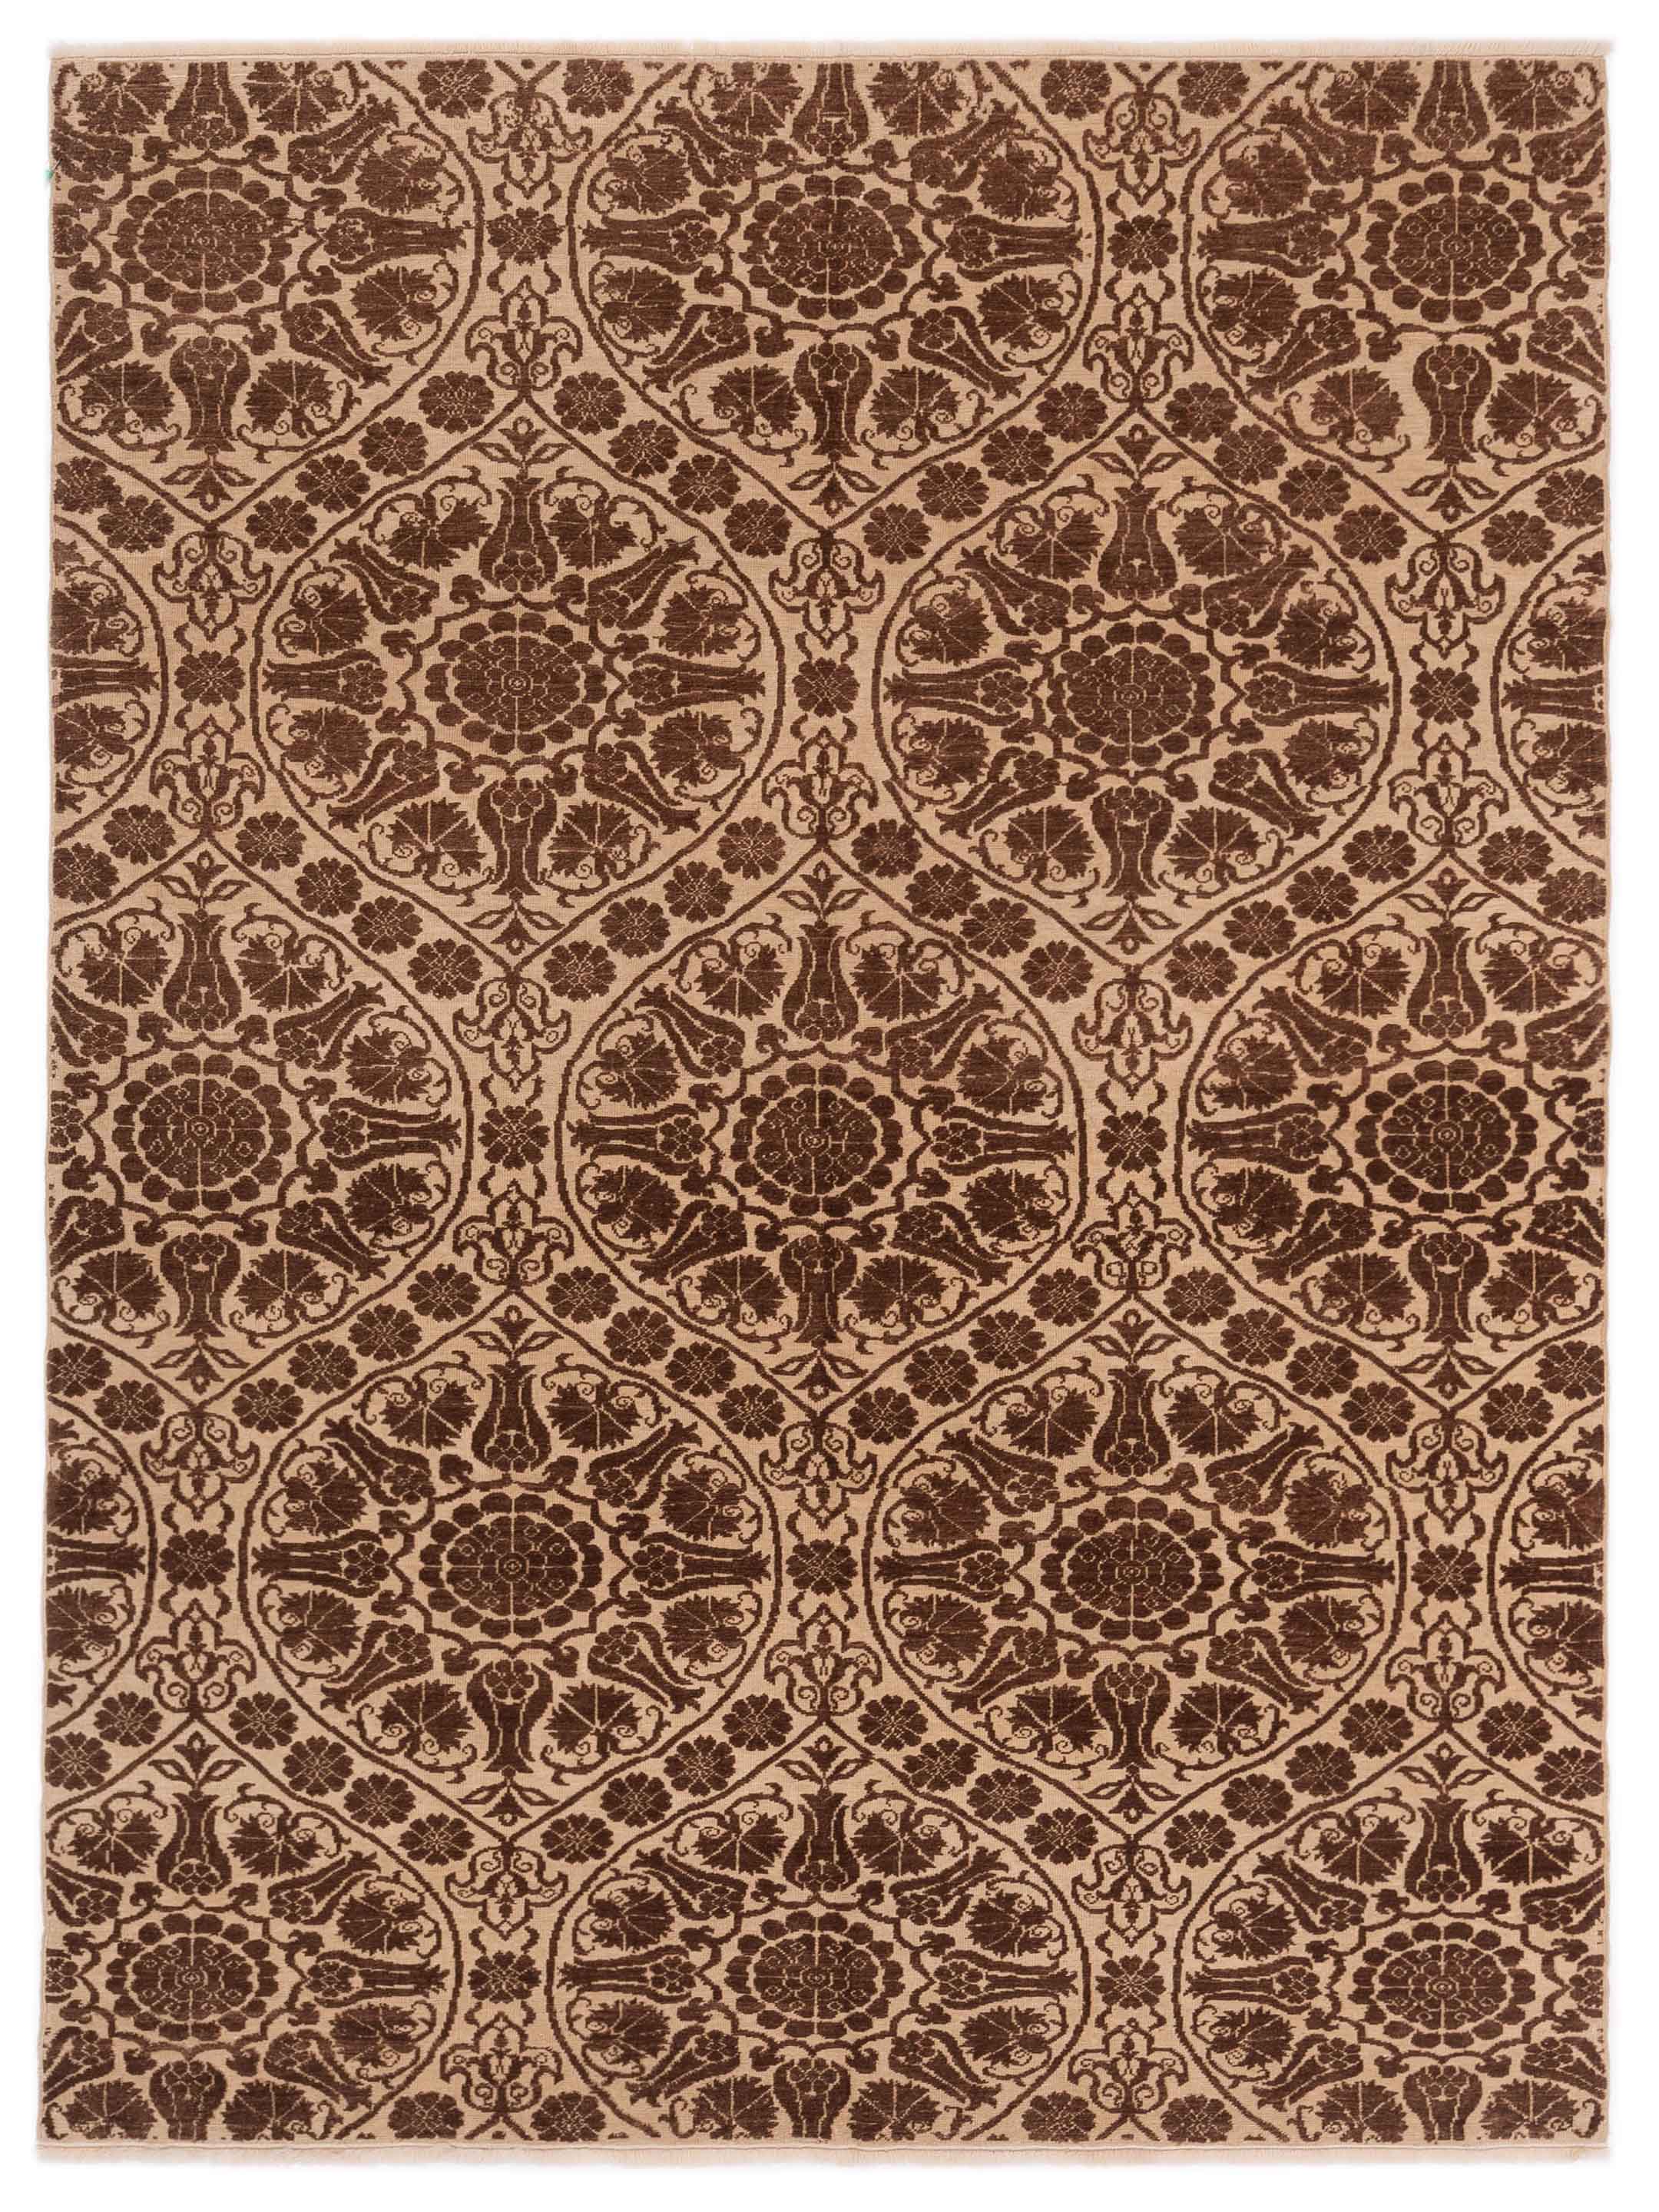 Transitional Brown Ivory Area Rug	